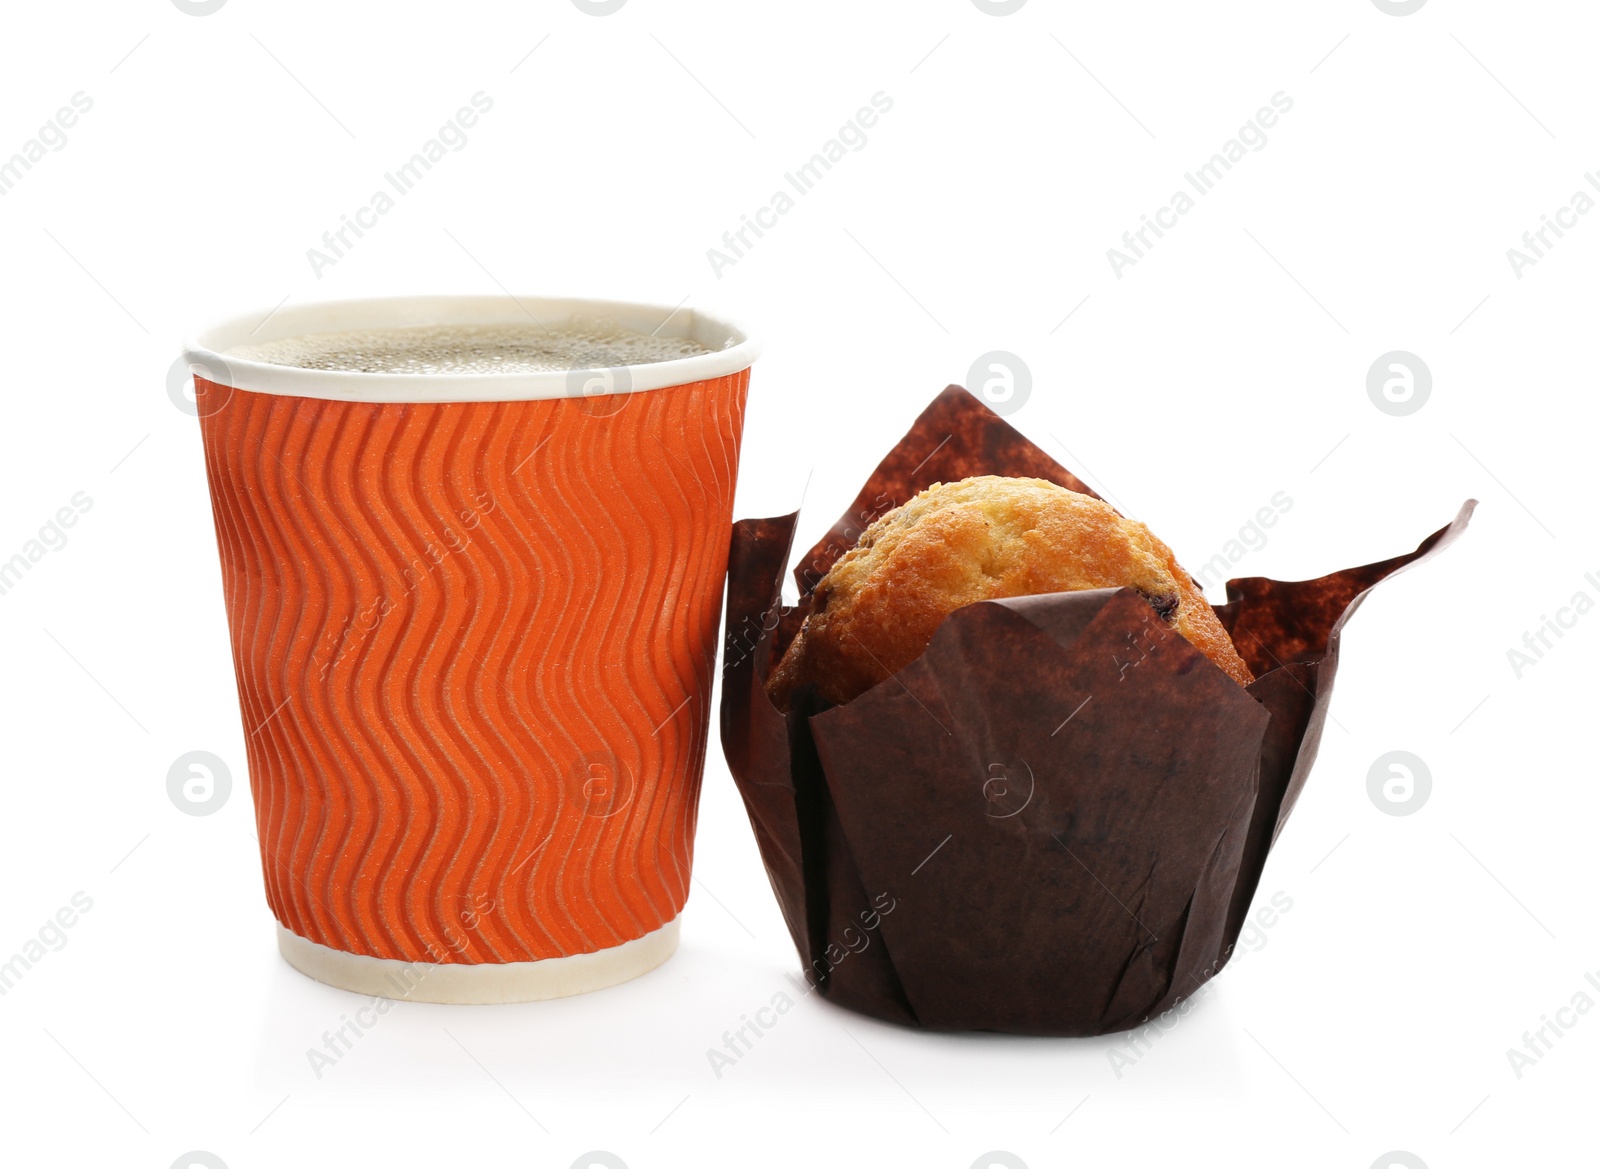 Photo of Cardboard cup of coffee and tasty muffin on white background